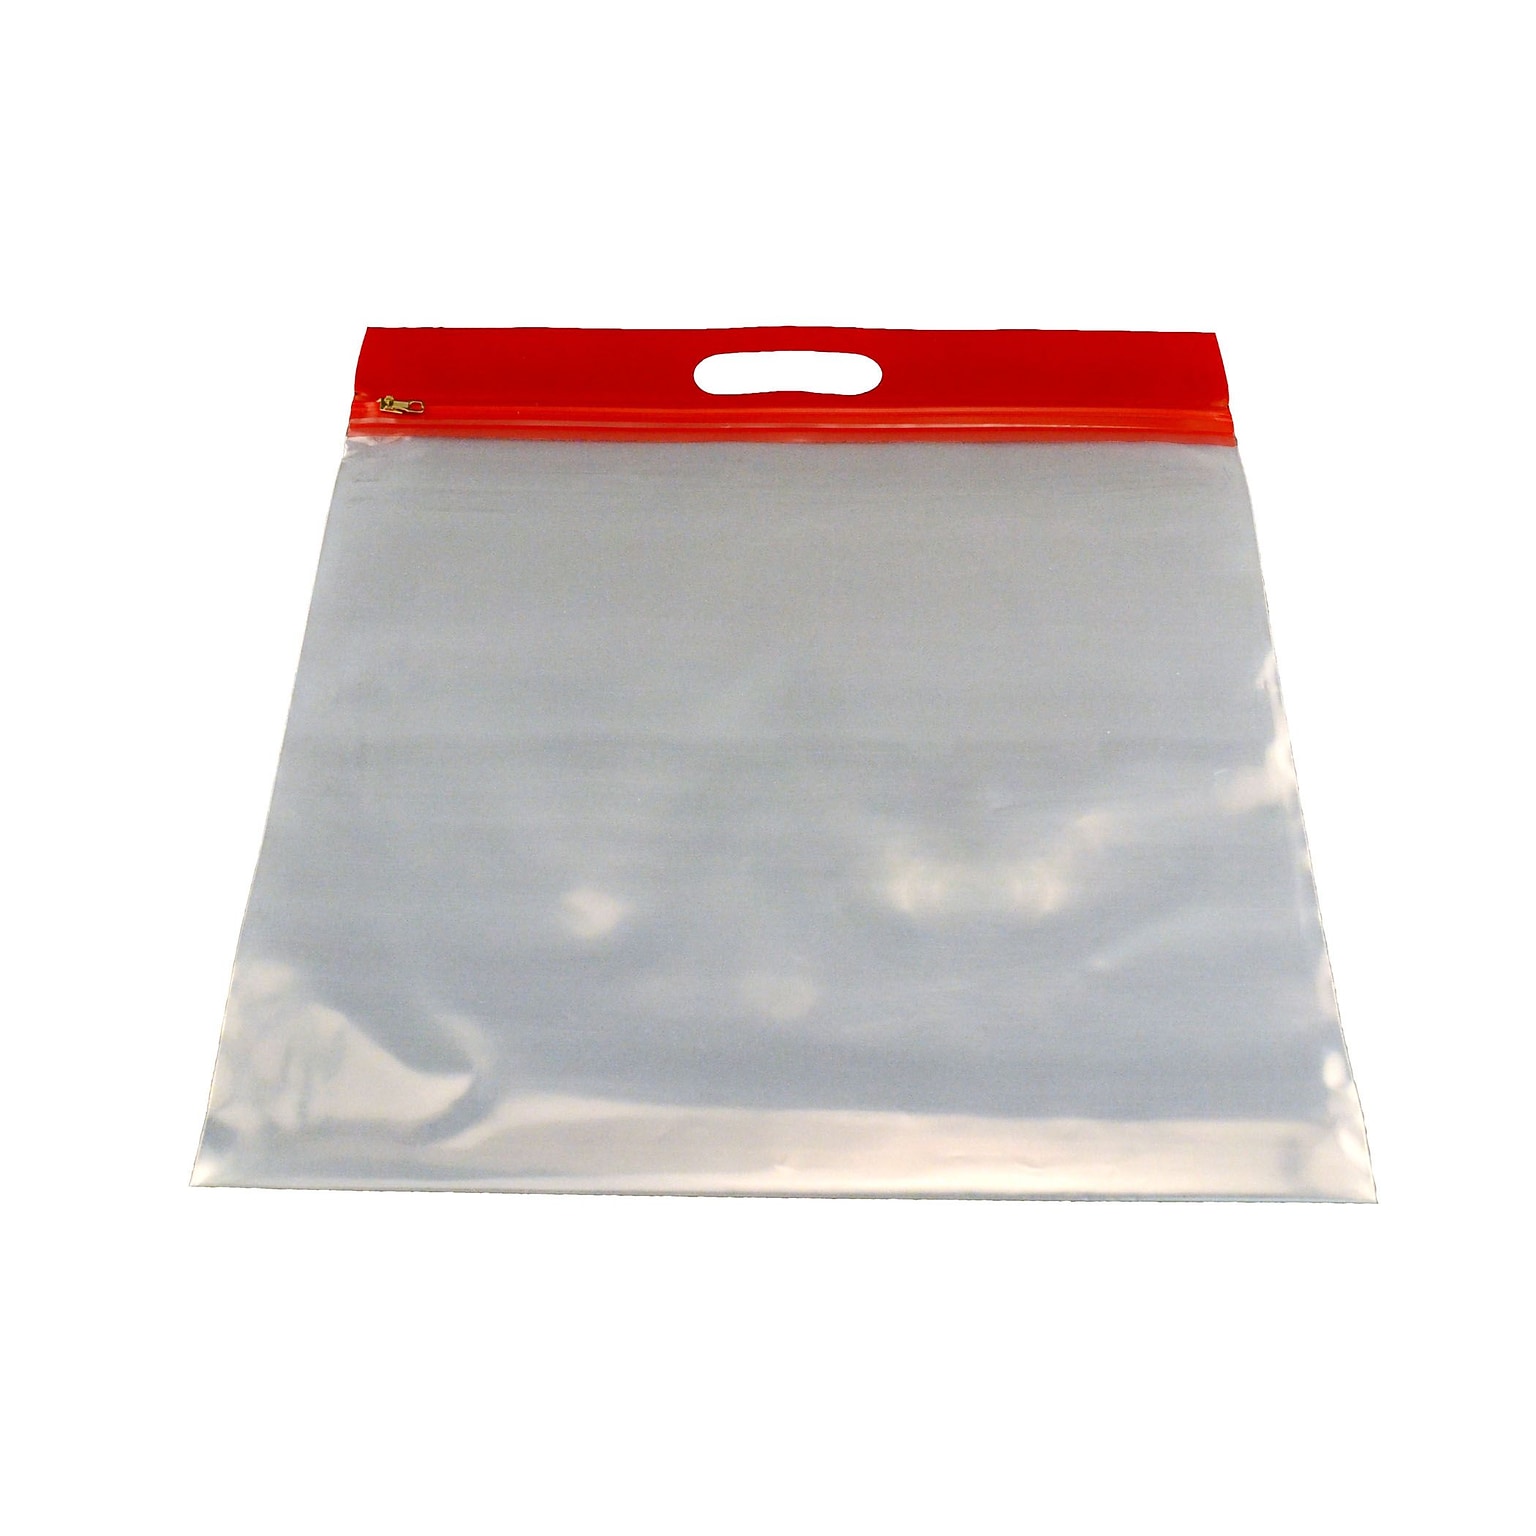 Bags of Bags ZIPAFILE 14H x 13W Polyethylene Storage Bags, Clear Bag - Red Zip, 25/Pack (BOBZFH1413R)